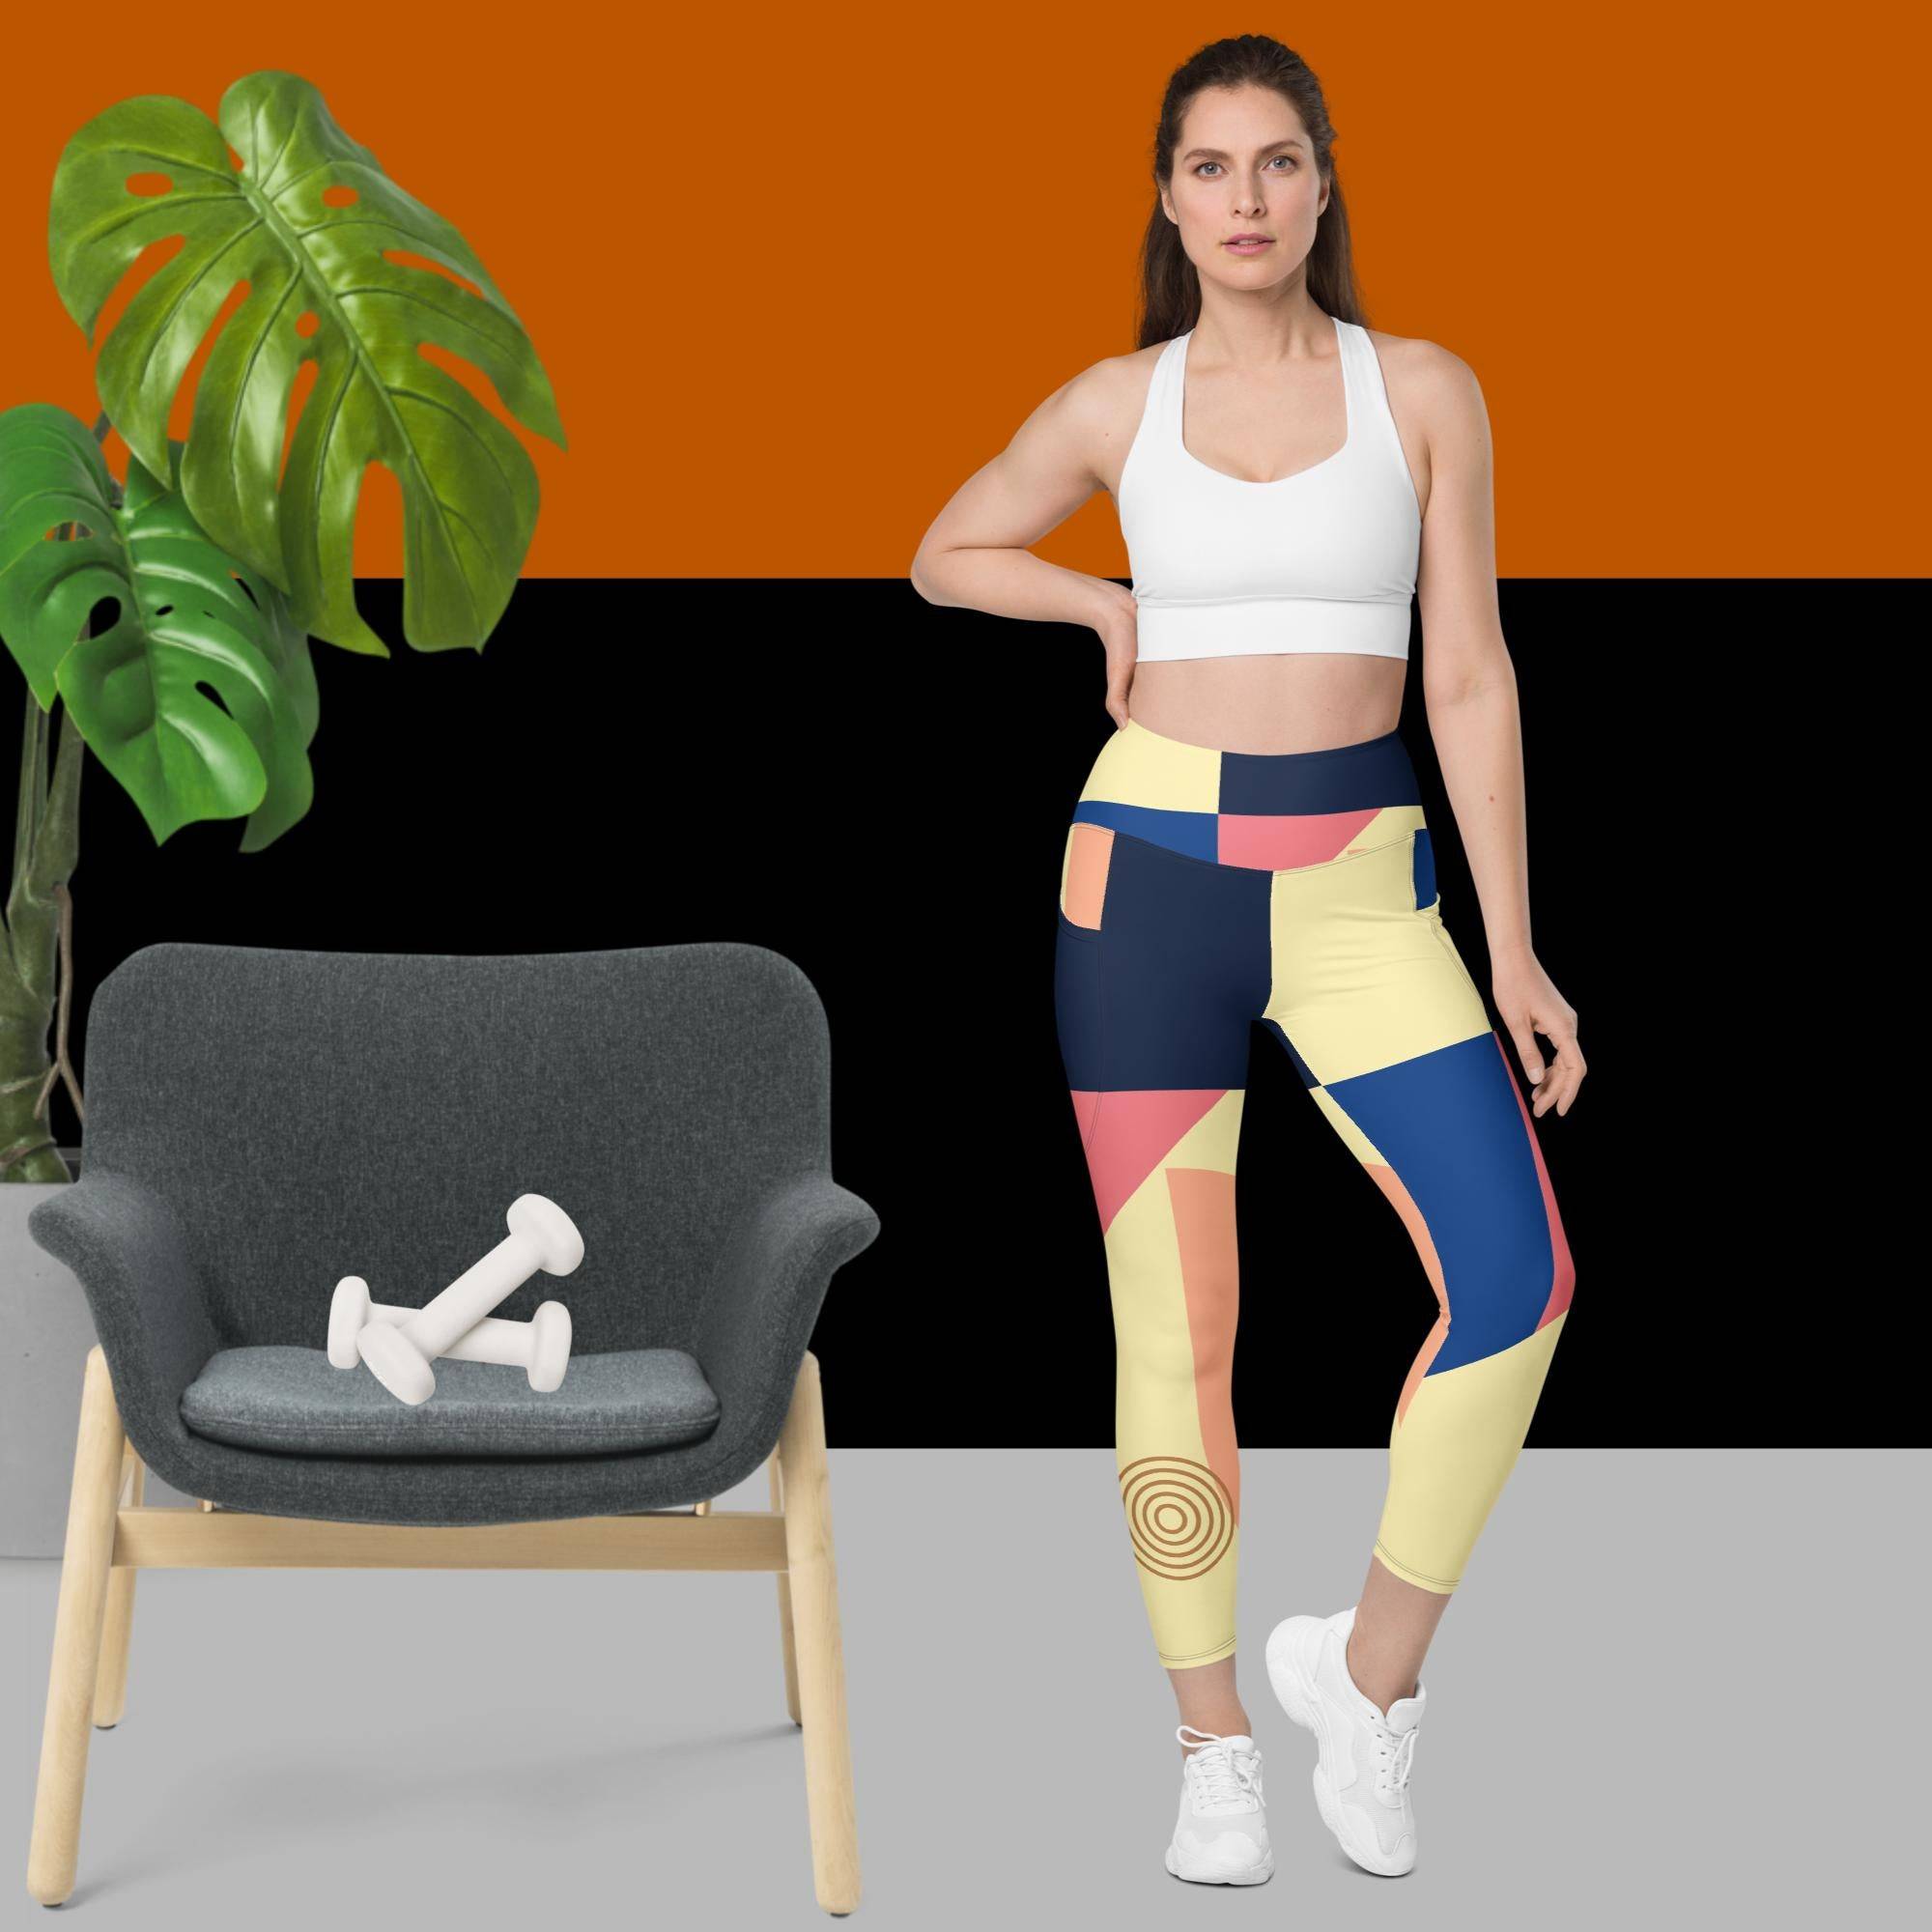 Activewear Abstract Pocket Leggings and Tights - Revive Wear     Get comfortable in style with our Abstract Pocket Leggings. Designed with a unique print, they also have functional pockets for convenience. Order online today!